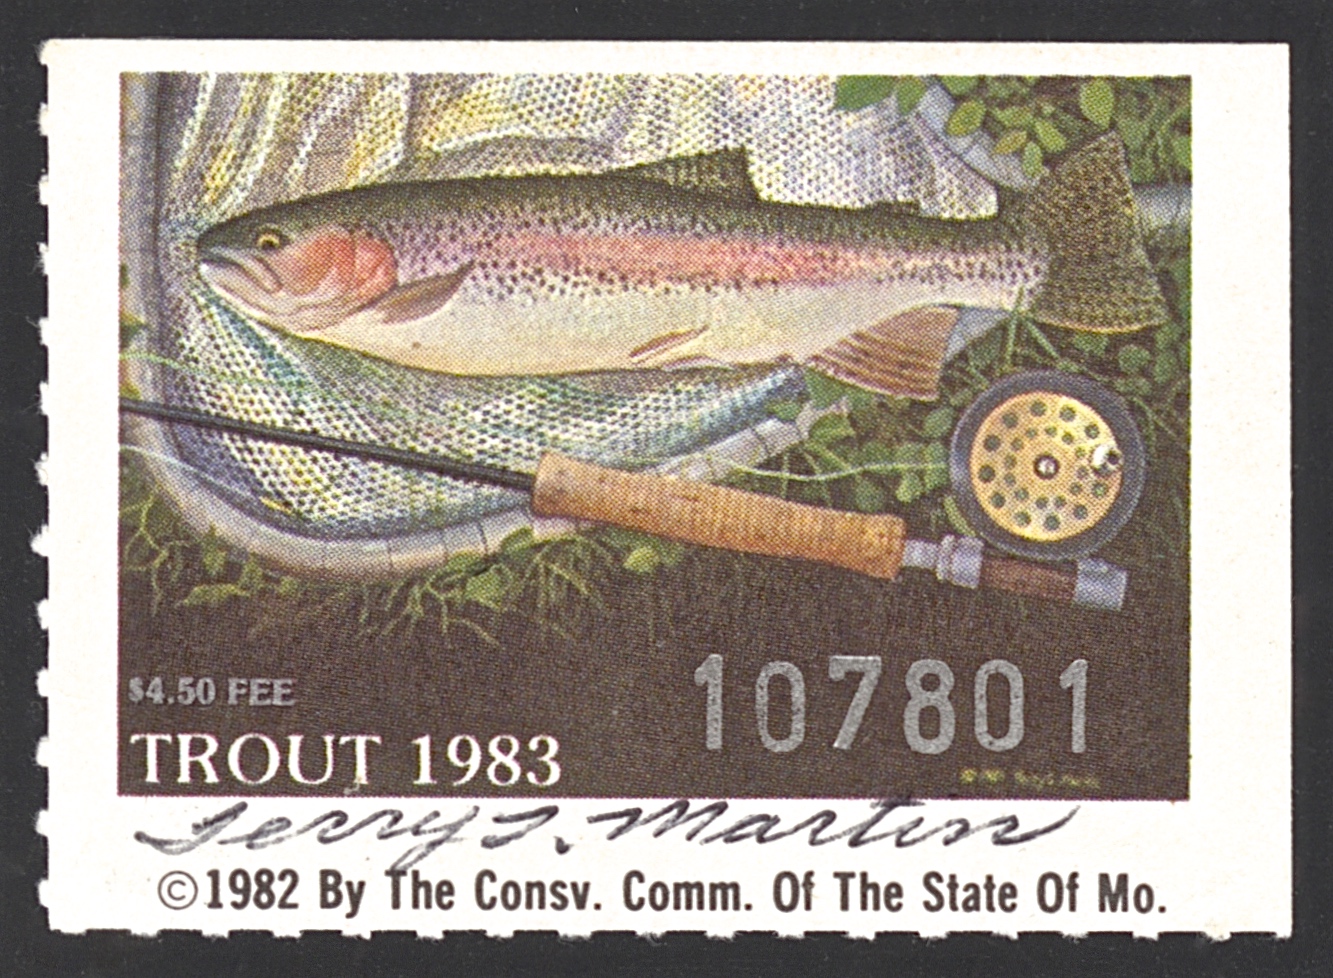 1983 Missouri Missouri Trout Stamp signed by Terry Martin